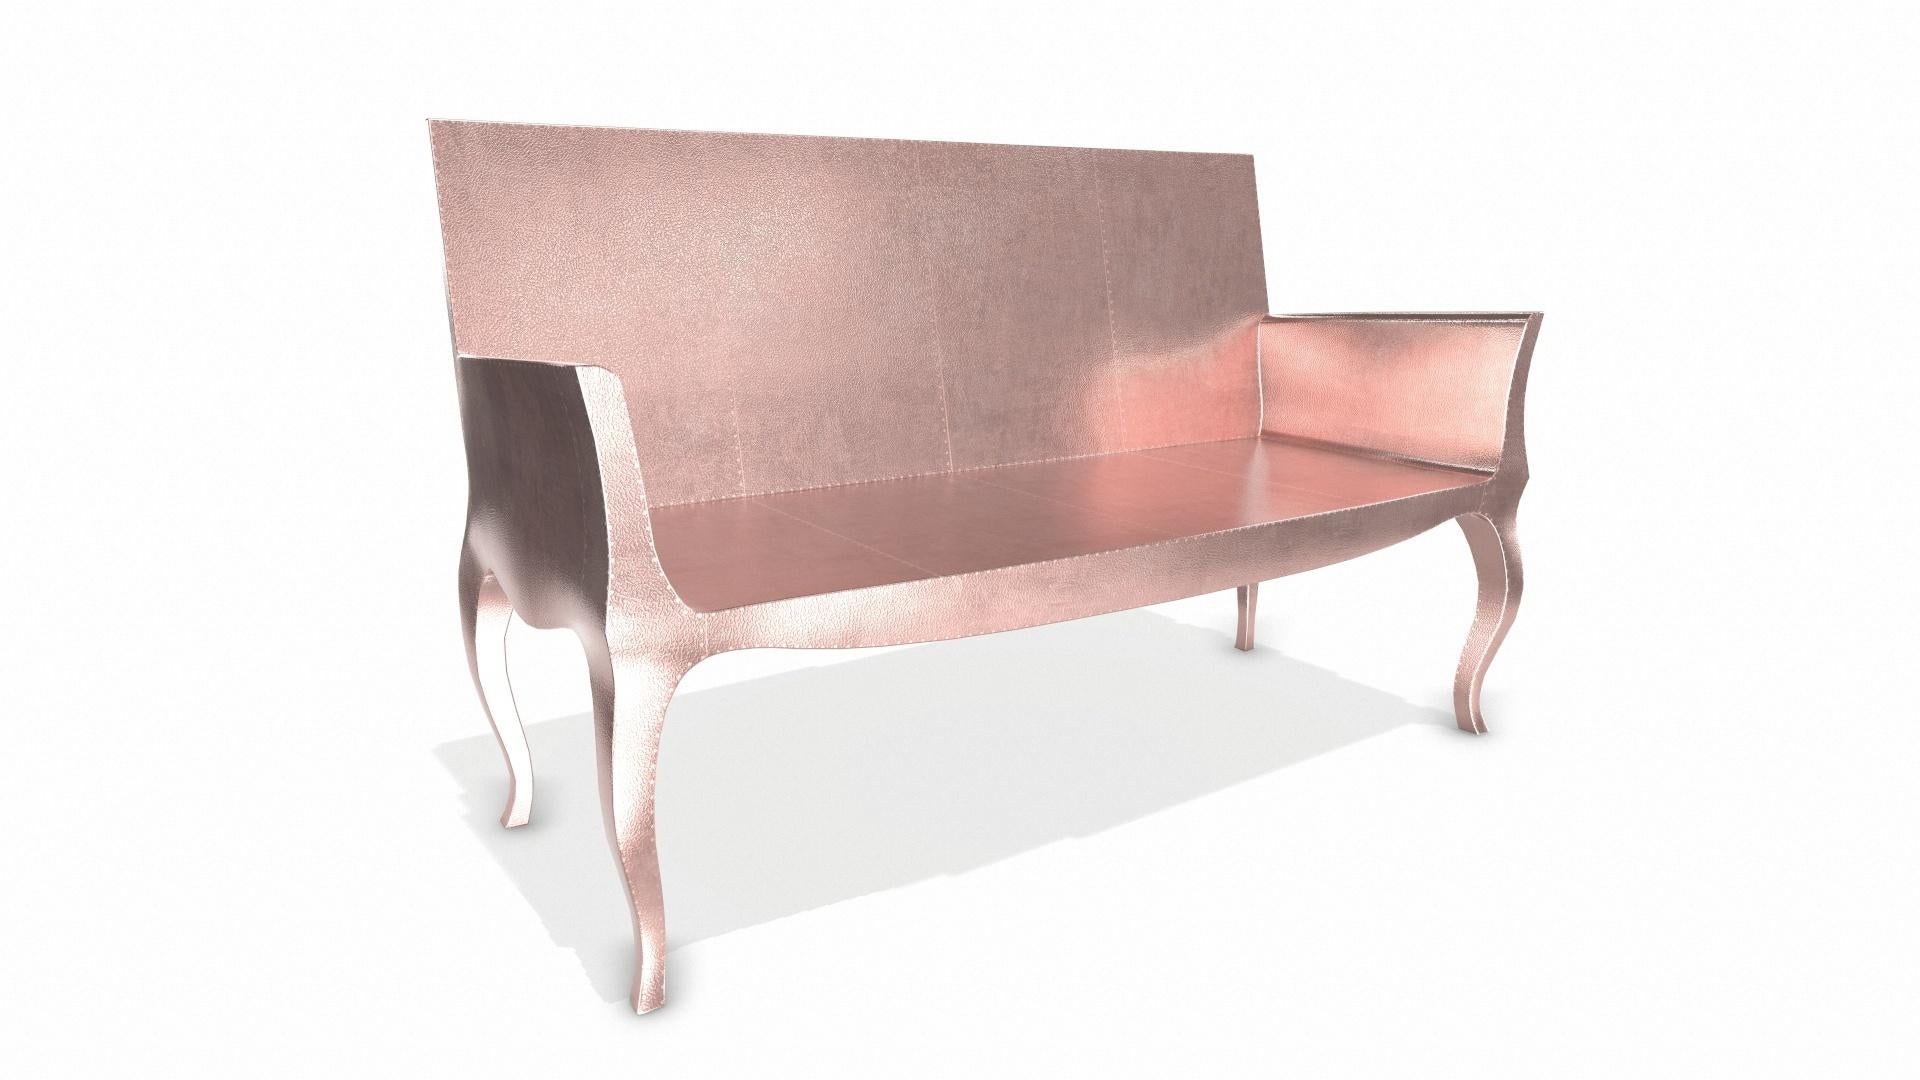 Contemporary Louise Settee Art Deco Benches in Fine Hammered Copper by Paul Mathieu For Sale